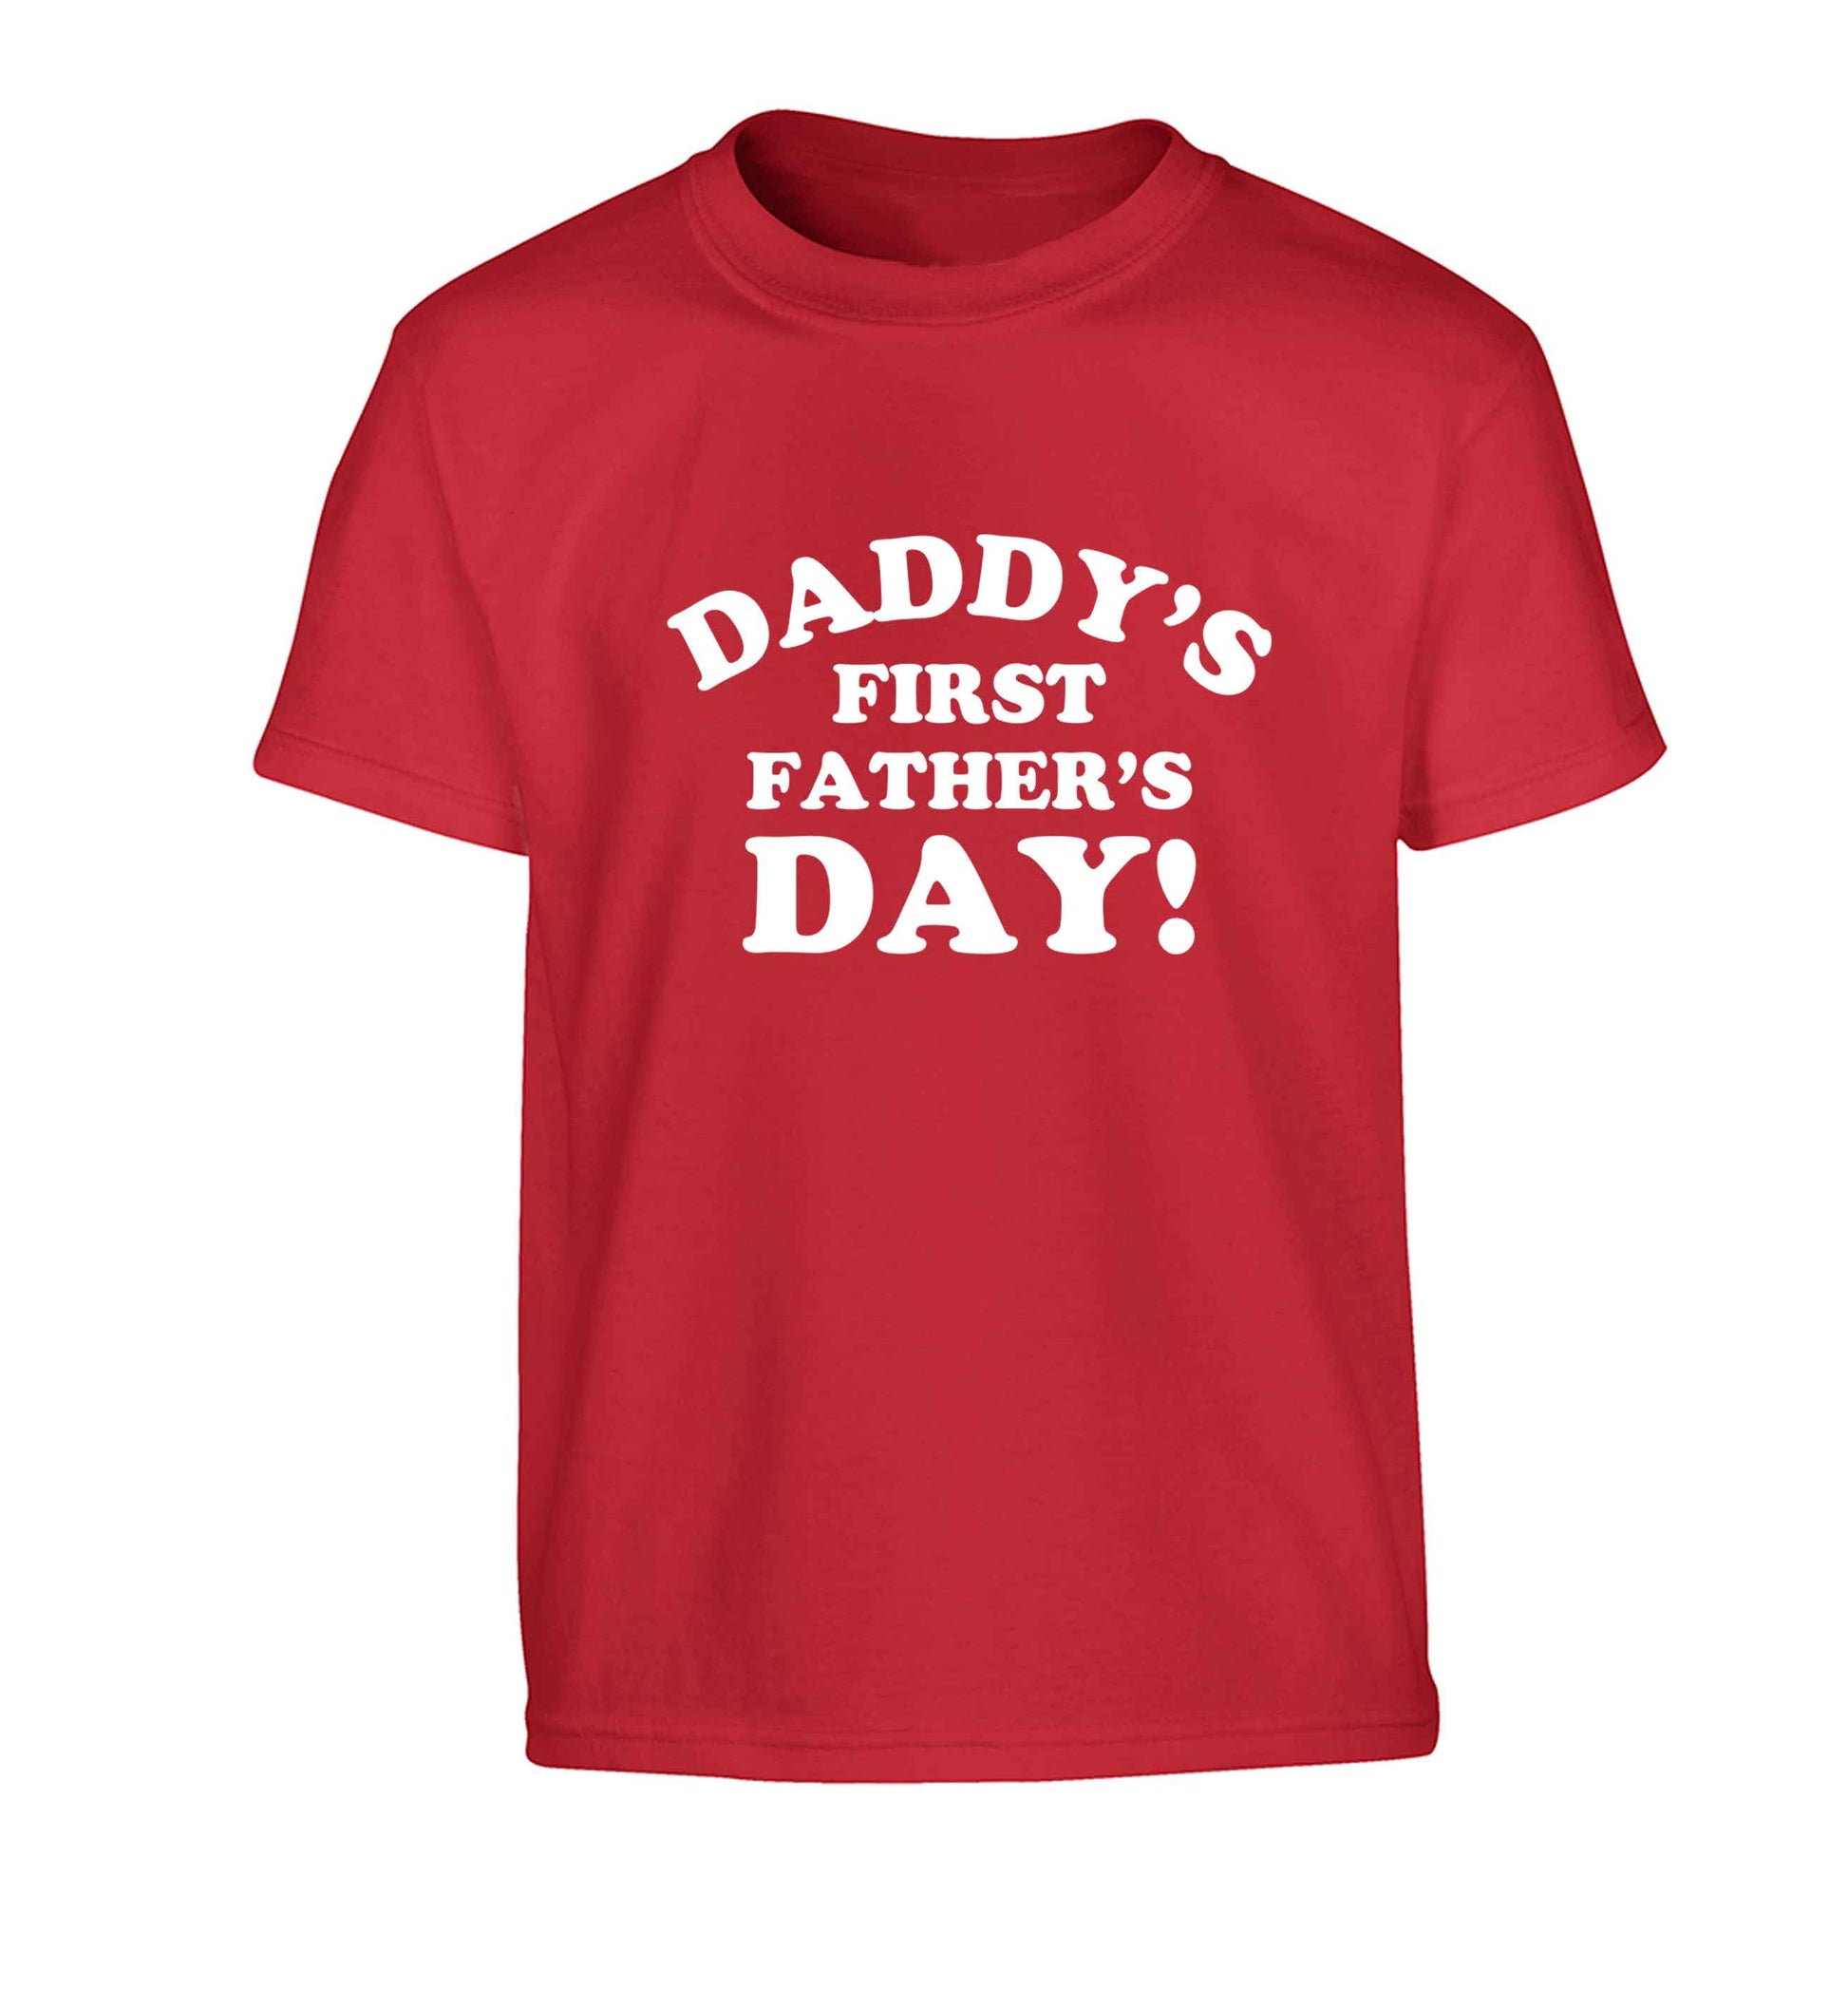 Daddy's first father's day Children's red Tshirt 12-13 Years